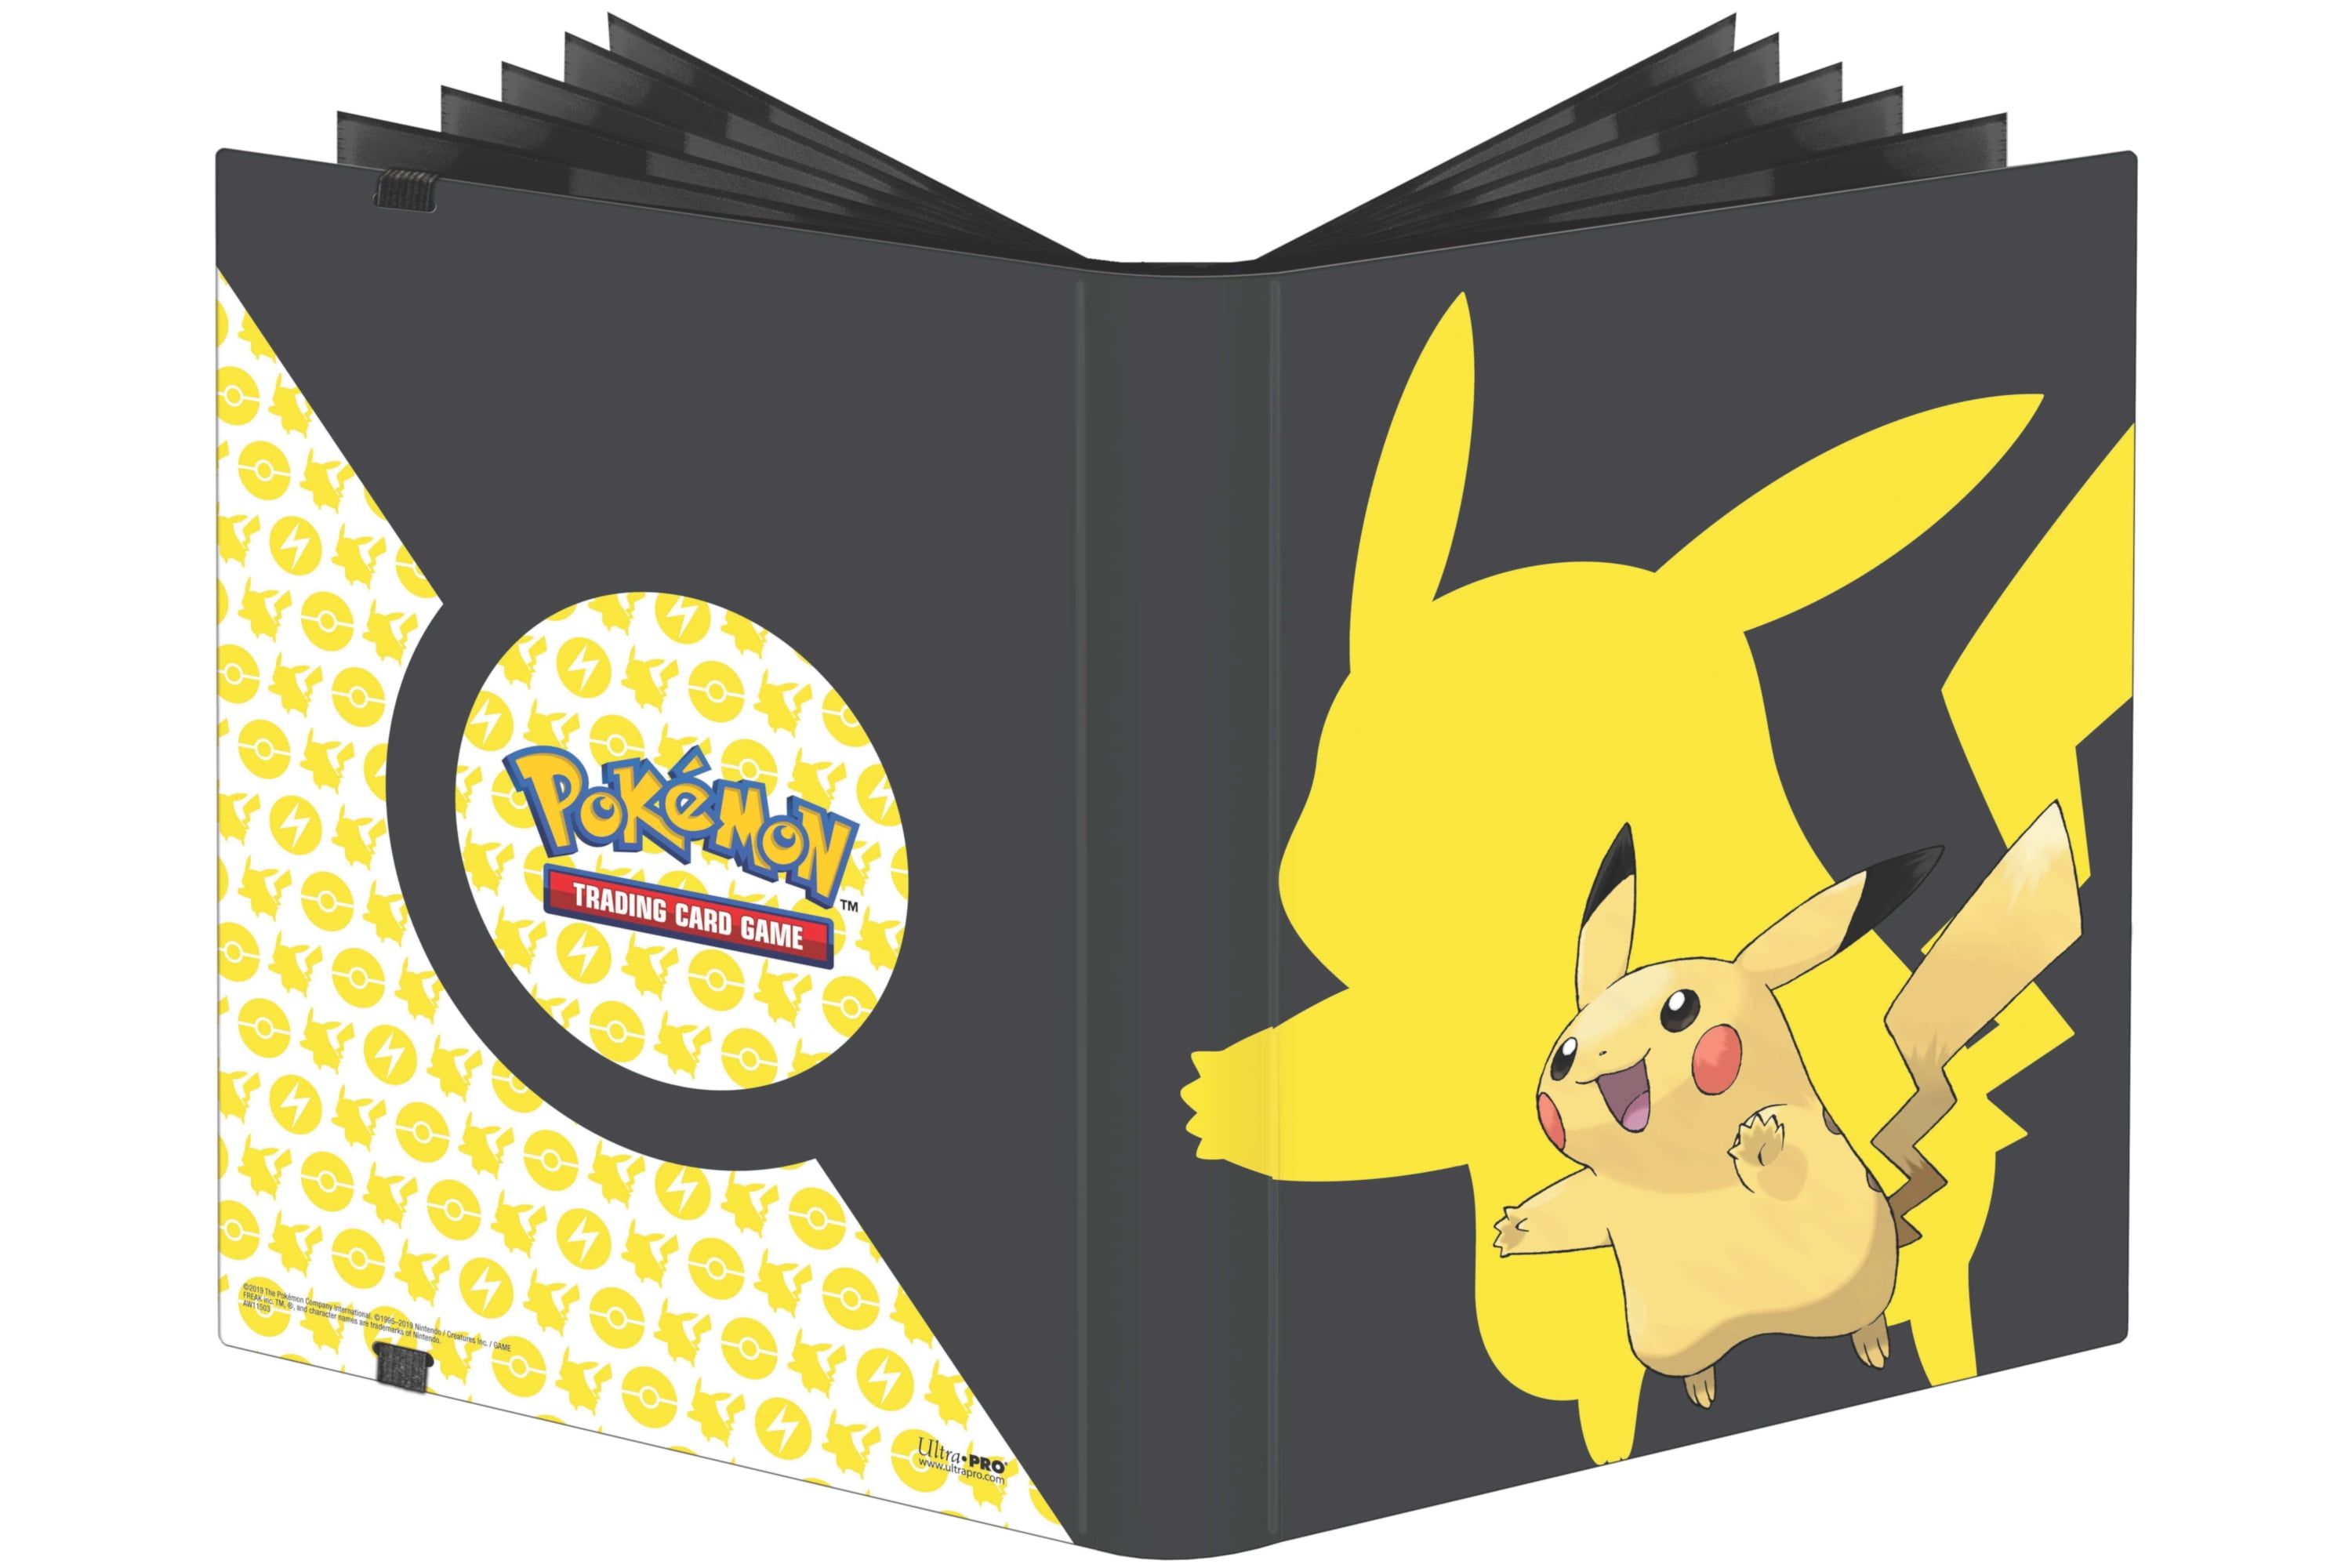 Ultra Pro Pokemon Charizard 2019 Pro-binder Card Holder 20 Pages for Cards for sale online